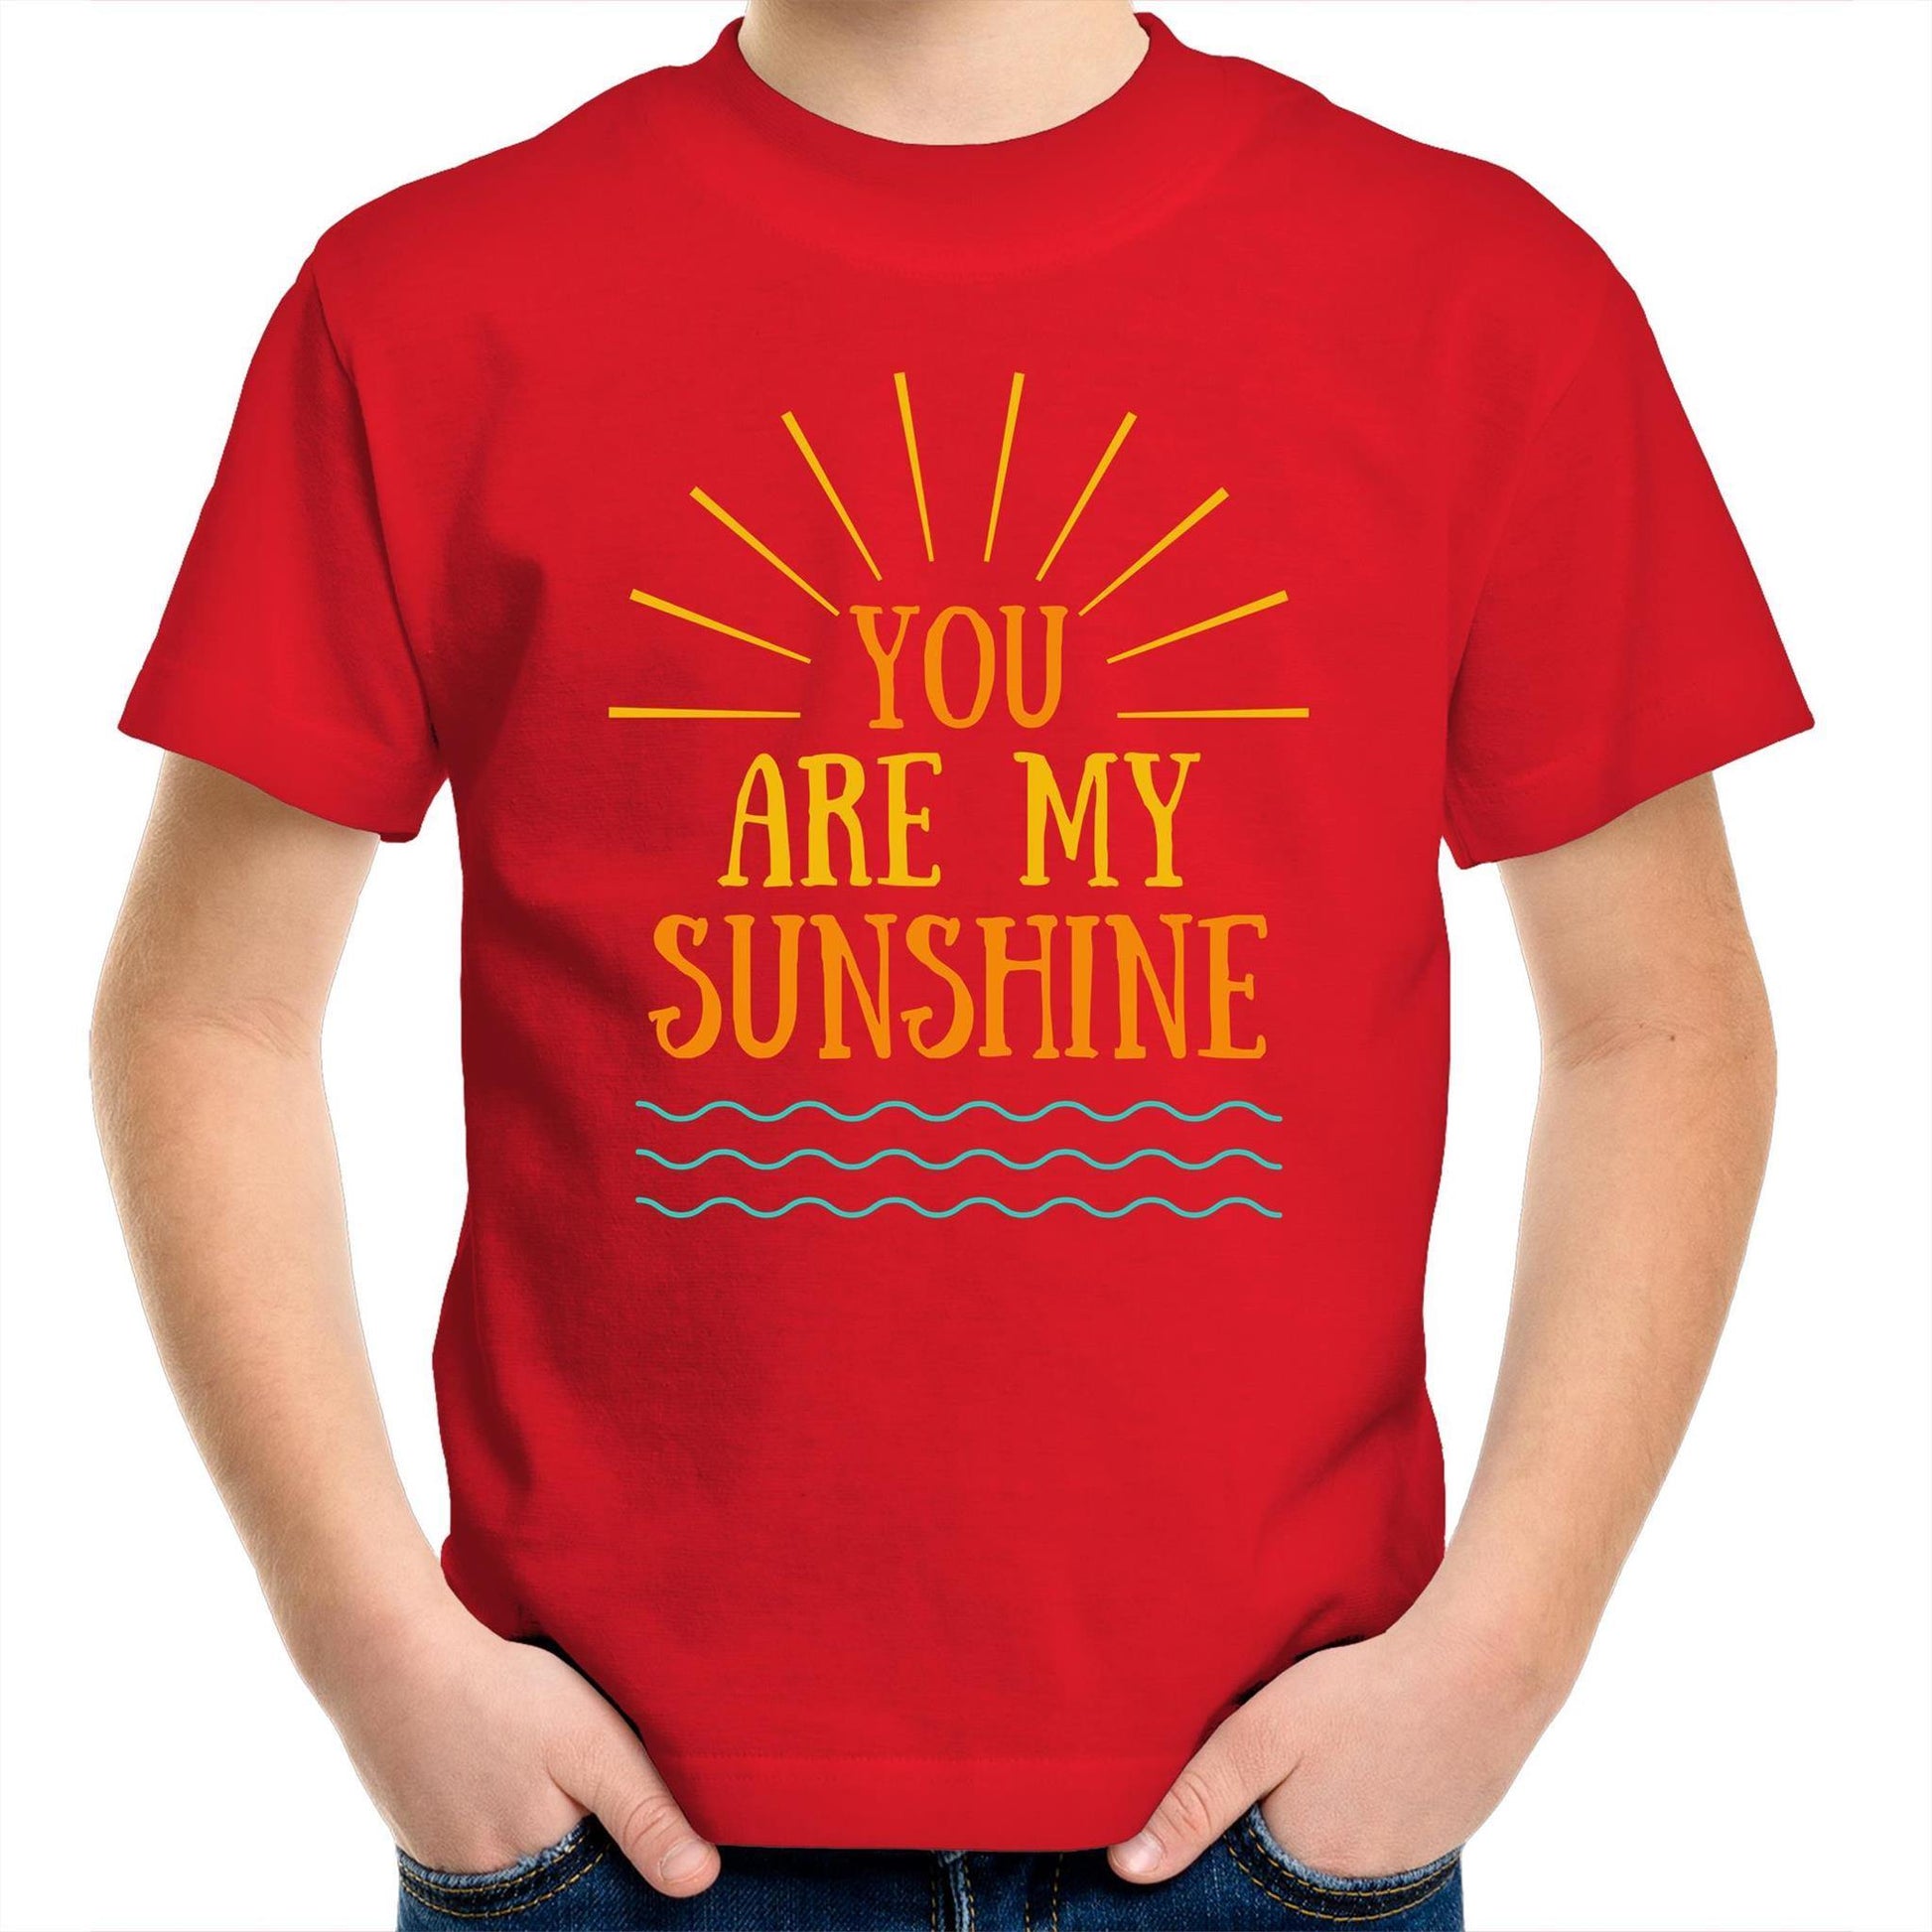 You Are My Sunshine - Kids Youth Crew T-Shirt Red Kids Youth T-shirt Summer